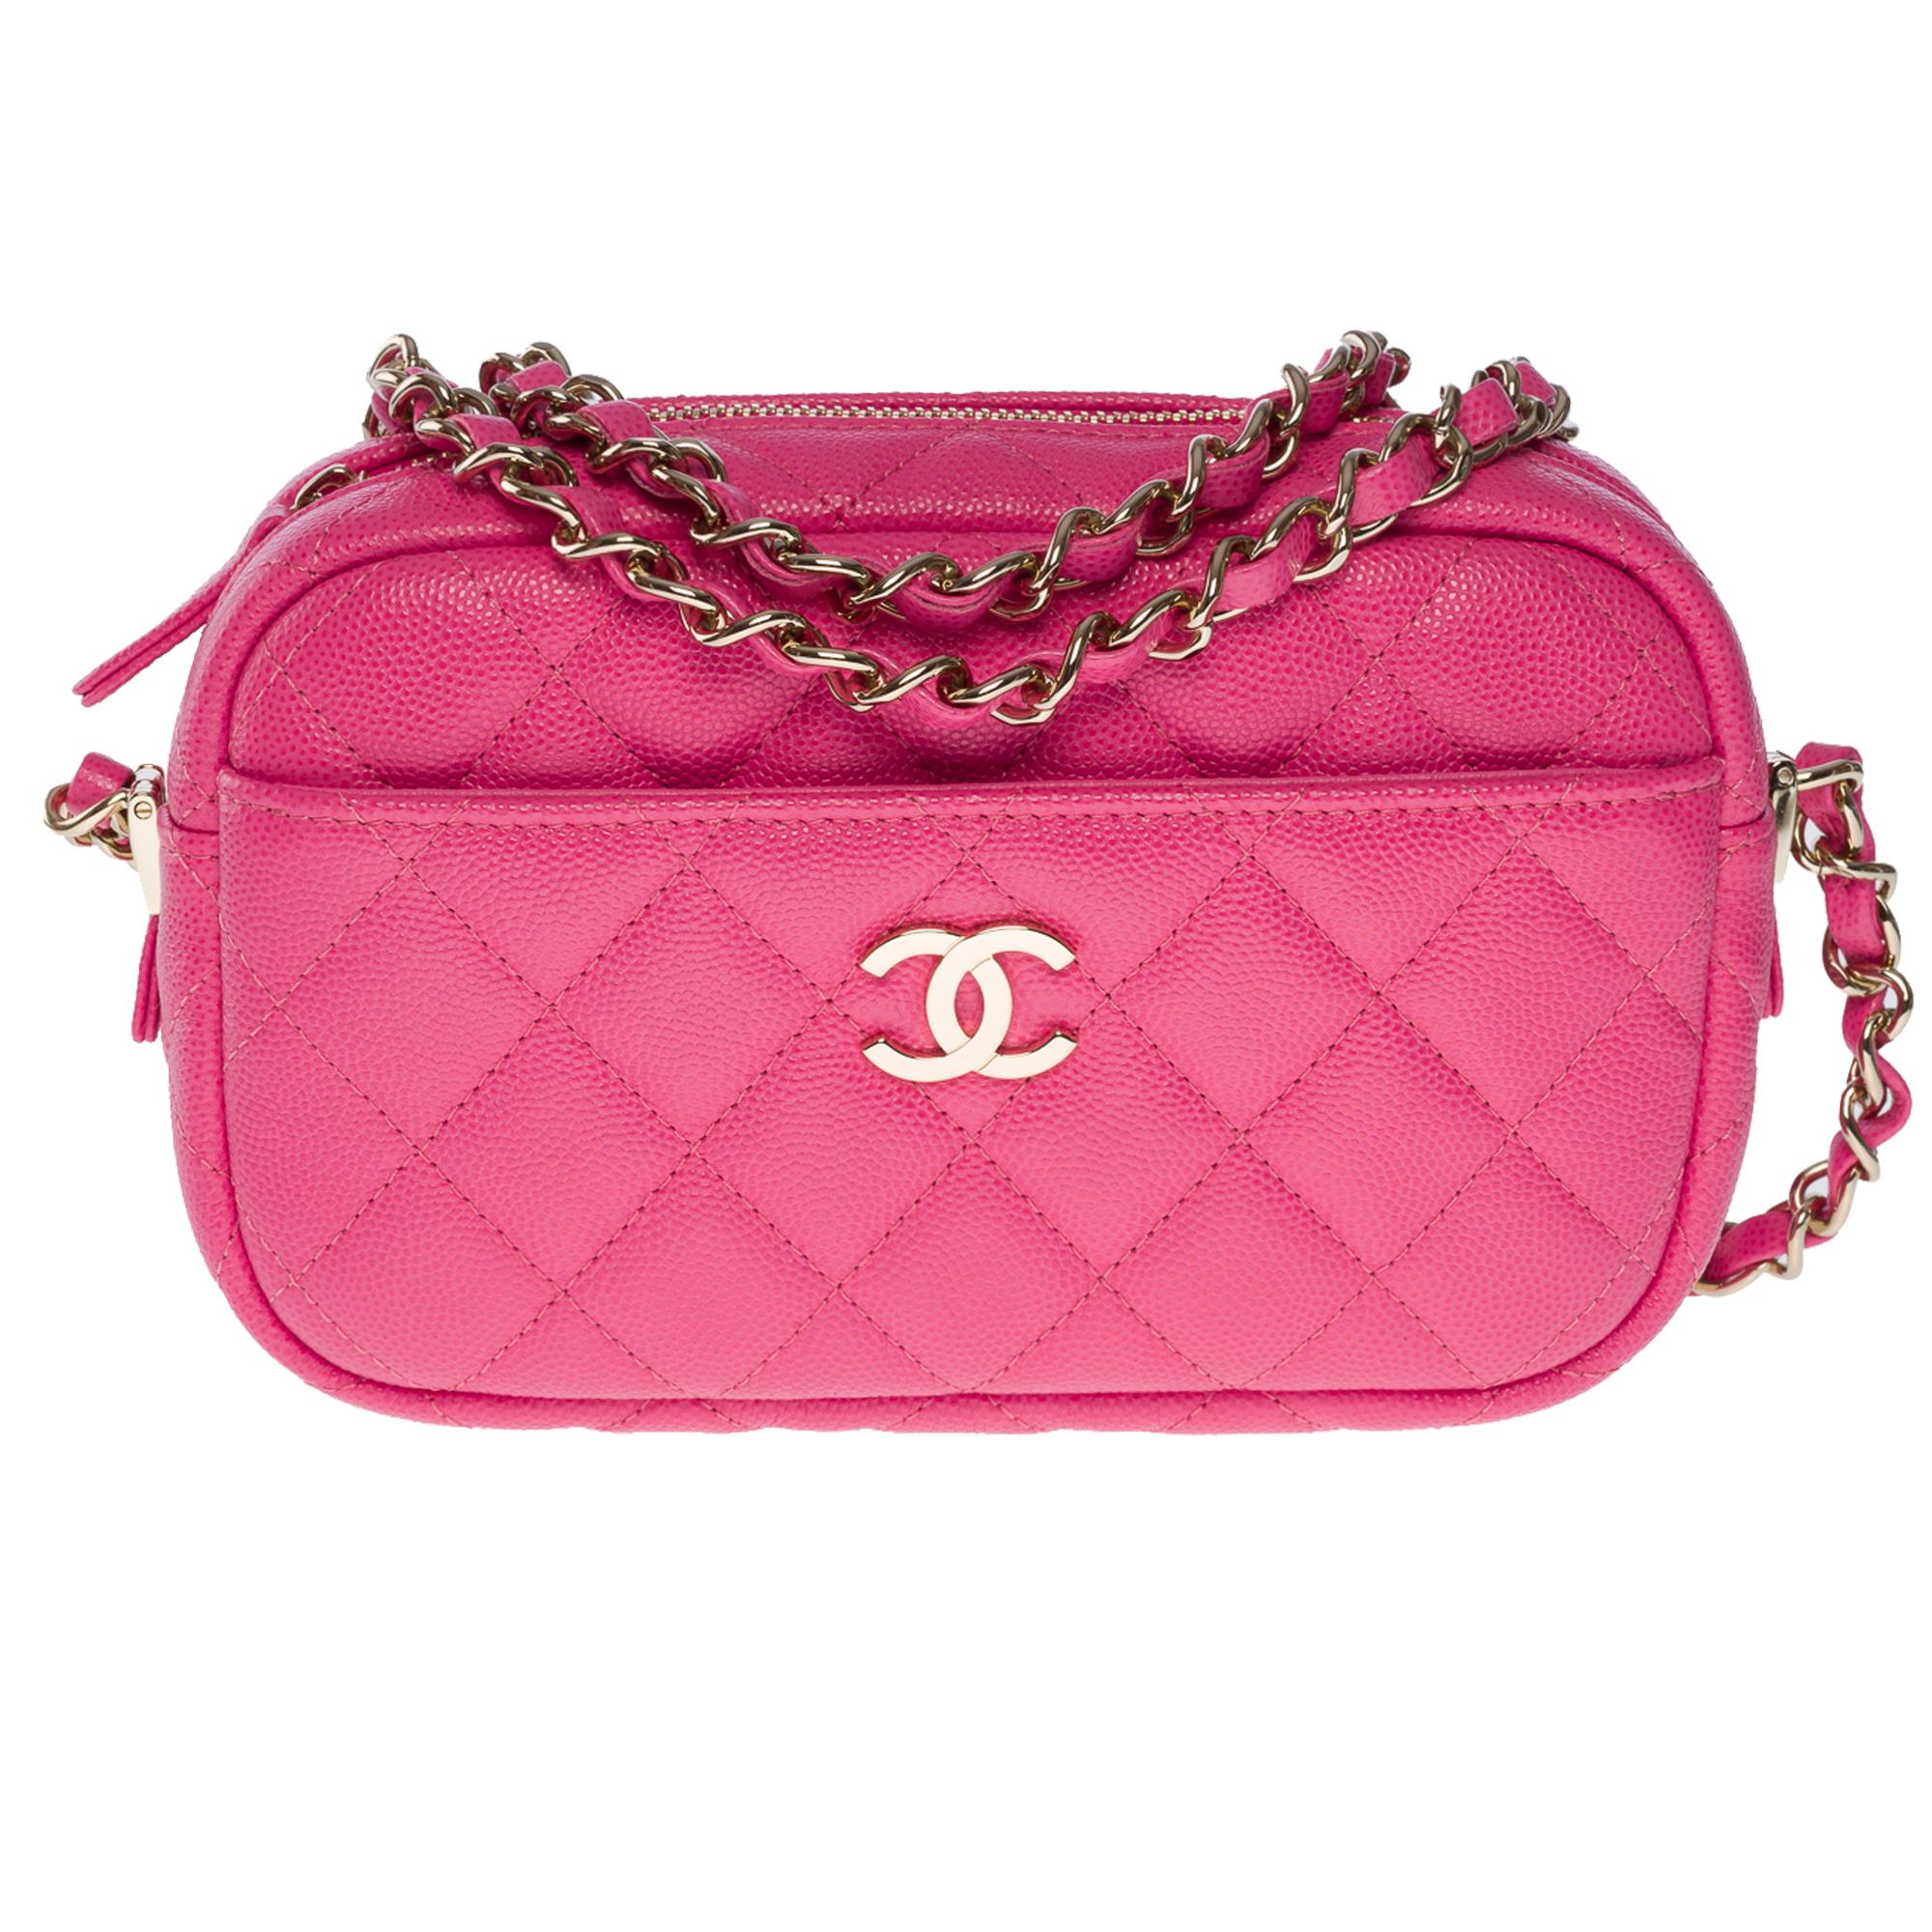 Exquisite Chanel Camera shoulder bag in pink caviar quilted leather, champagne metal hardware, a champagne metal chain handle interwoven with pink leather for a hand, shoulder or crossbody carry

A zip closure
Pink leather lining, one patch pocket,